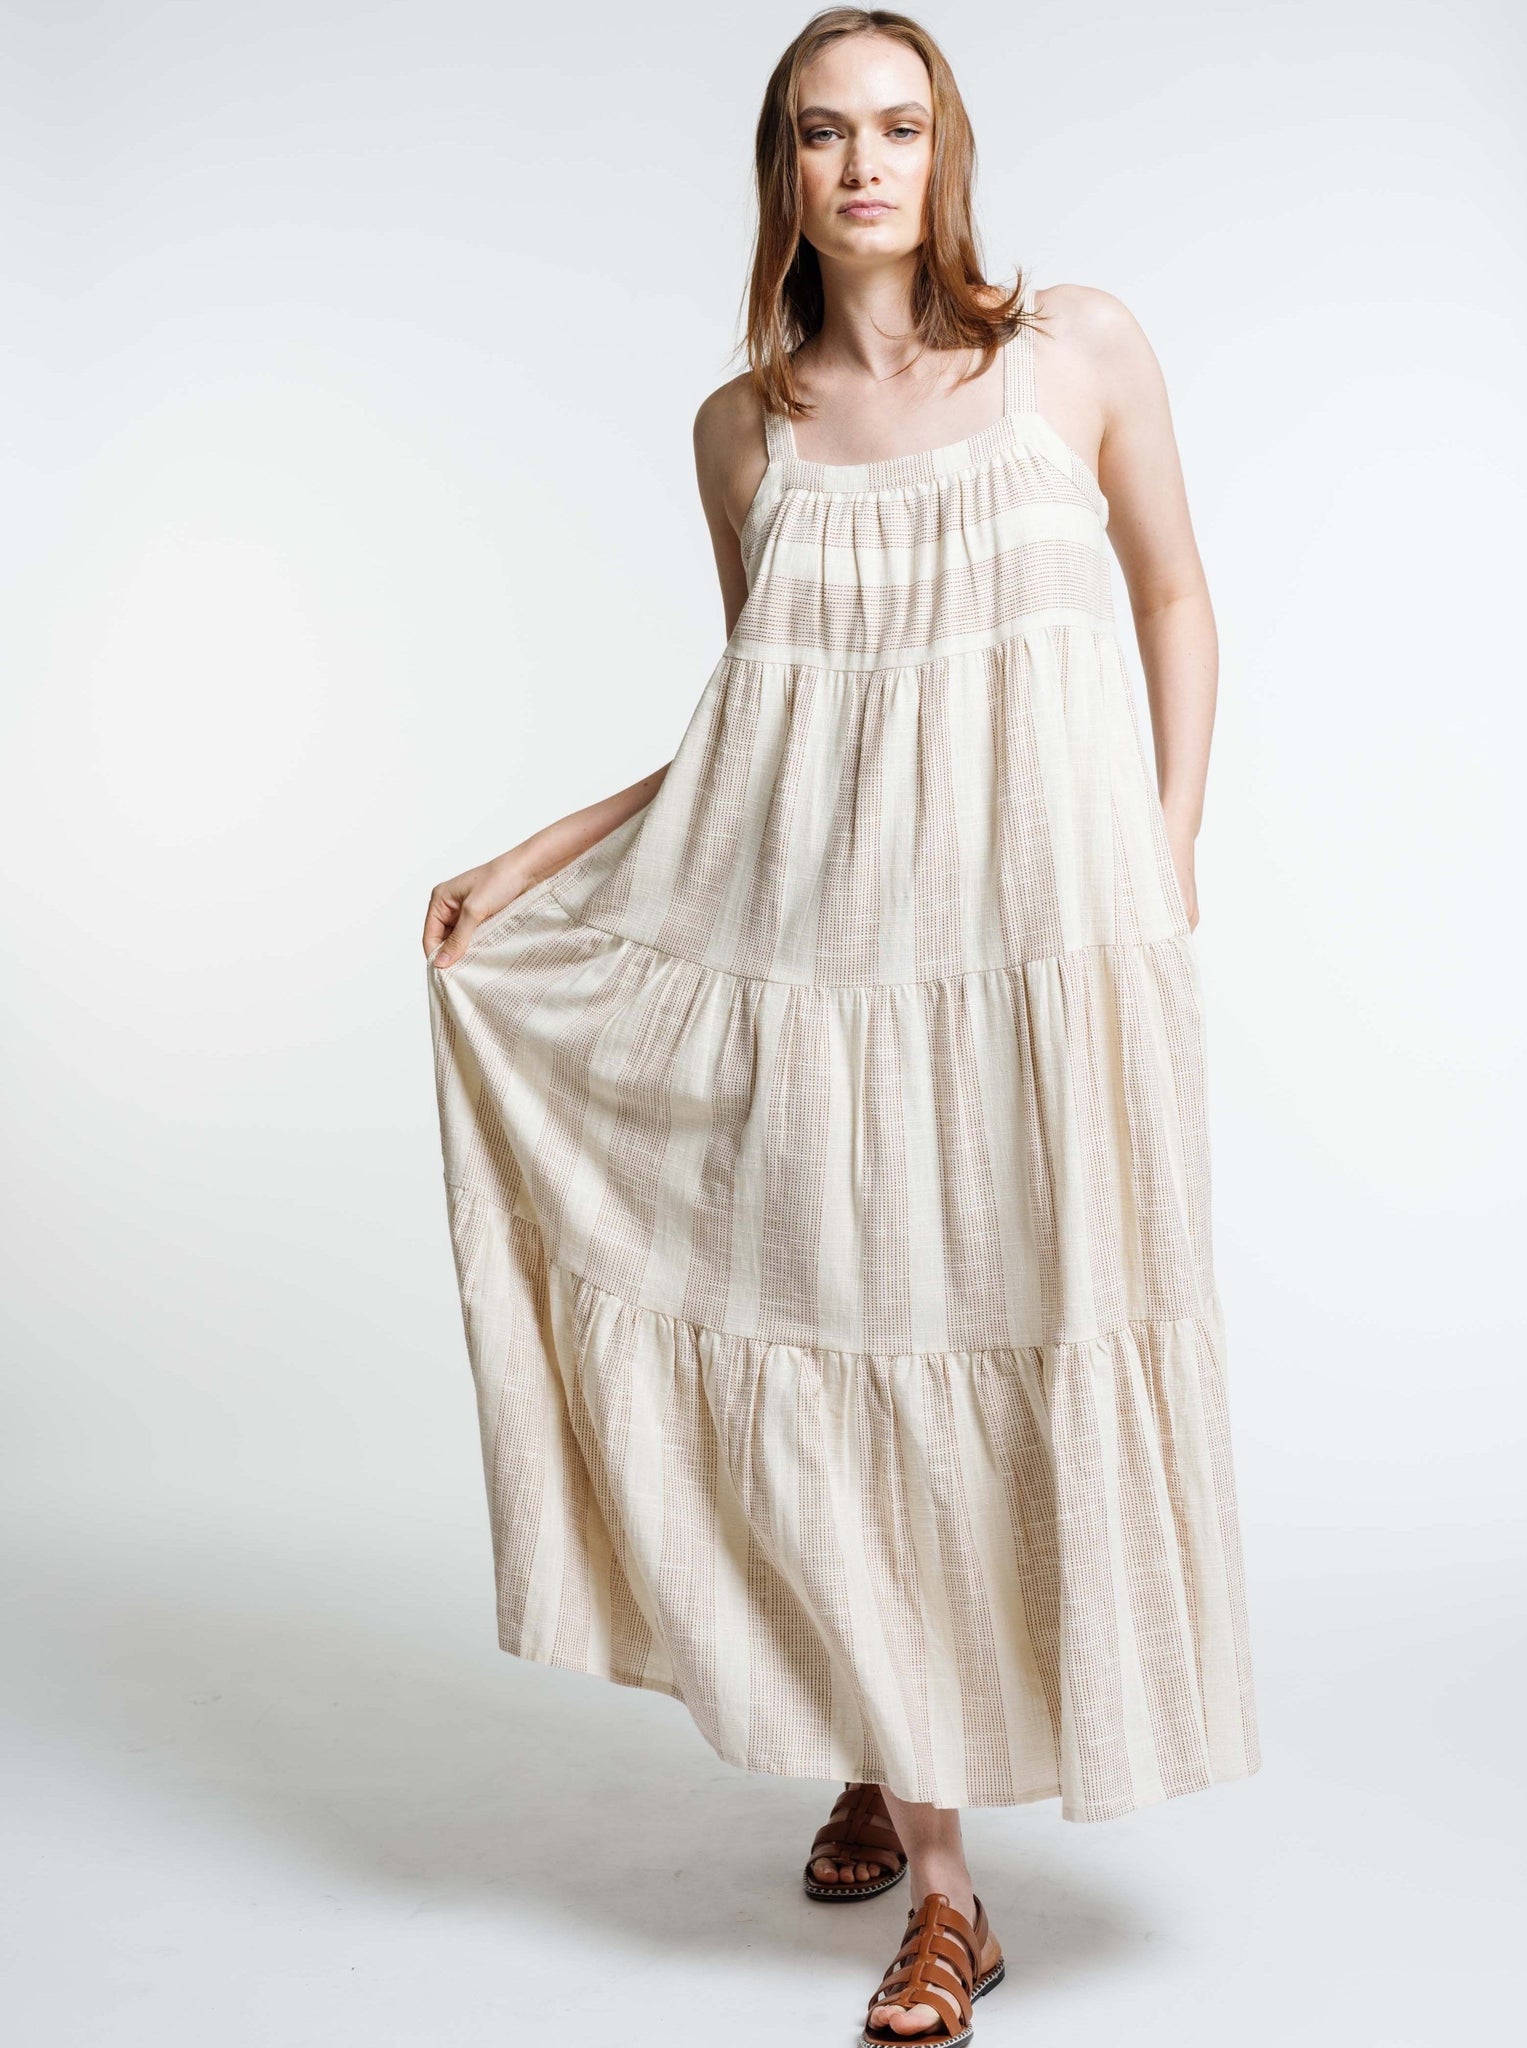 The model is wearing a Strappy Tiered Maxi Dress - Terracotta Ticking Stripe with ruffles and sandals.